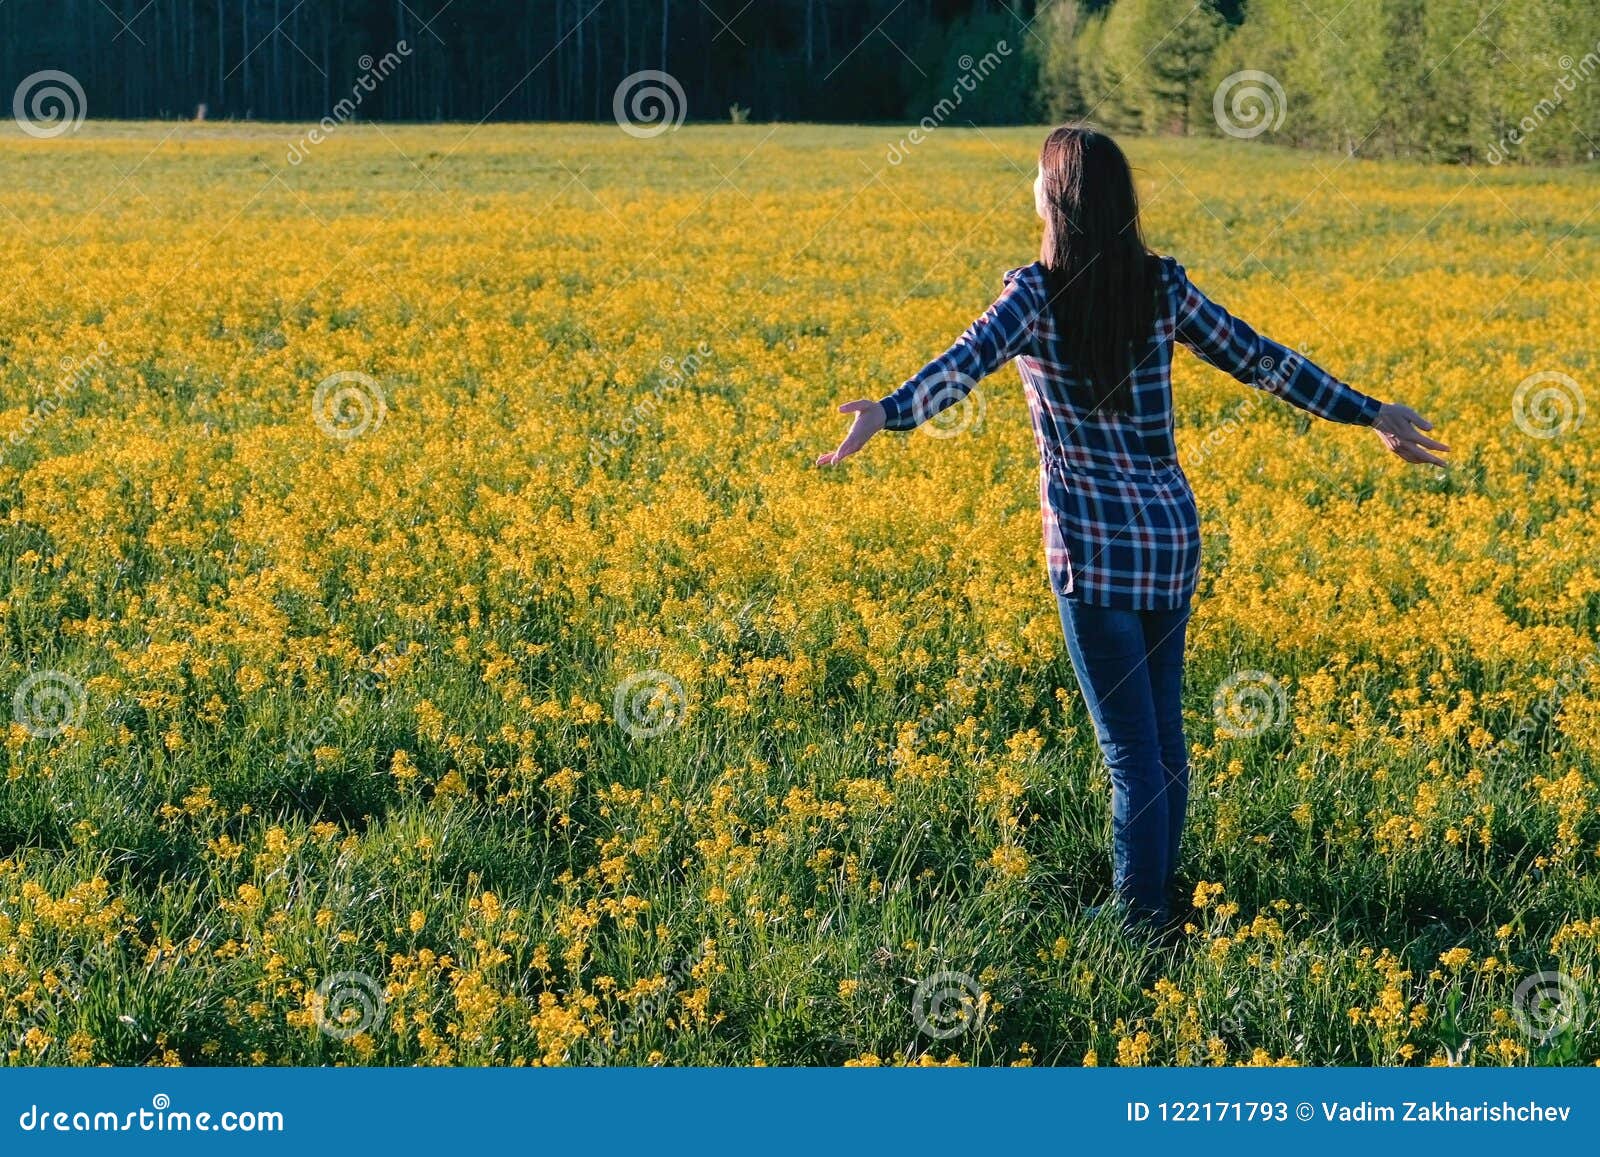 Portrait of Young Woman With Yellow Flowers in Field 